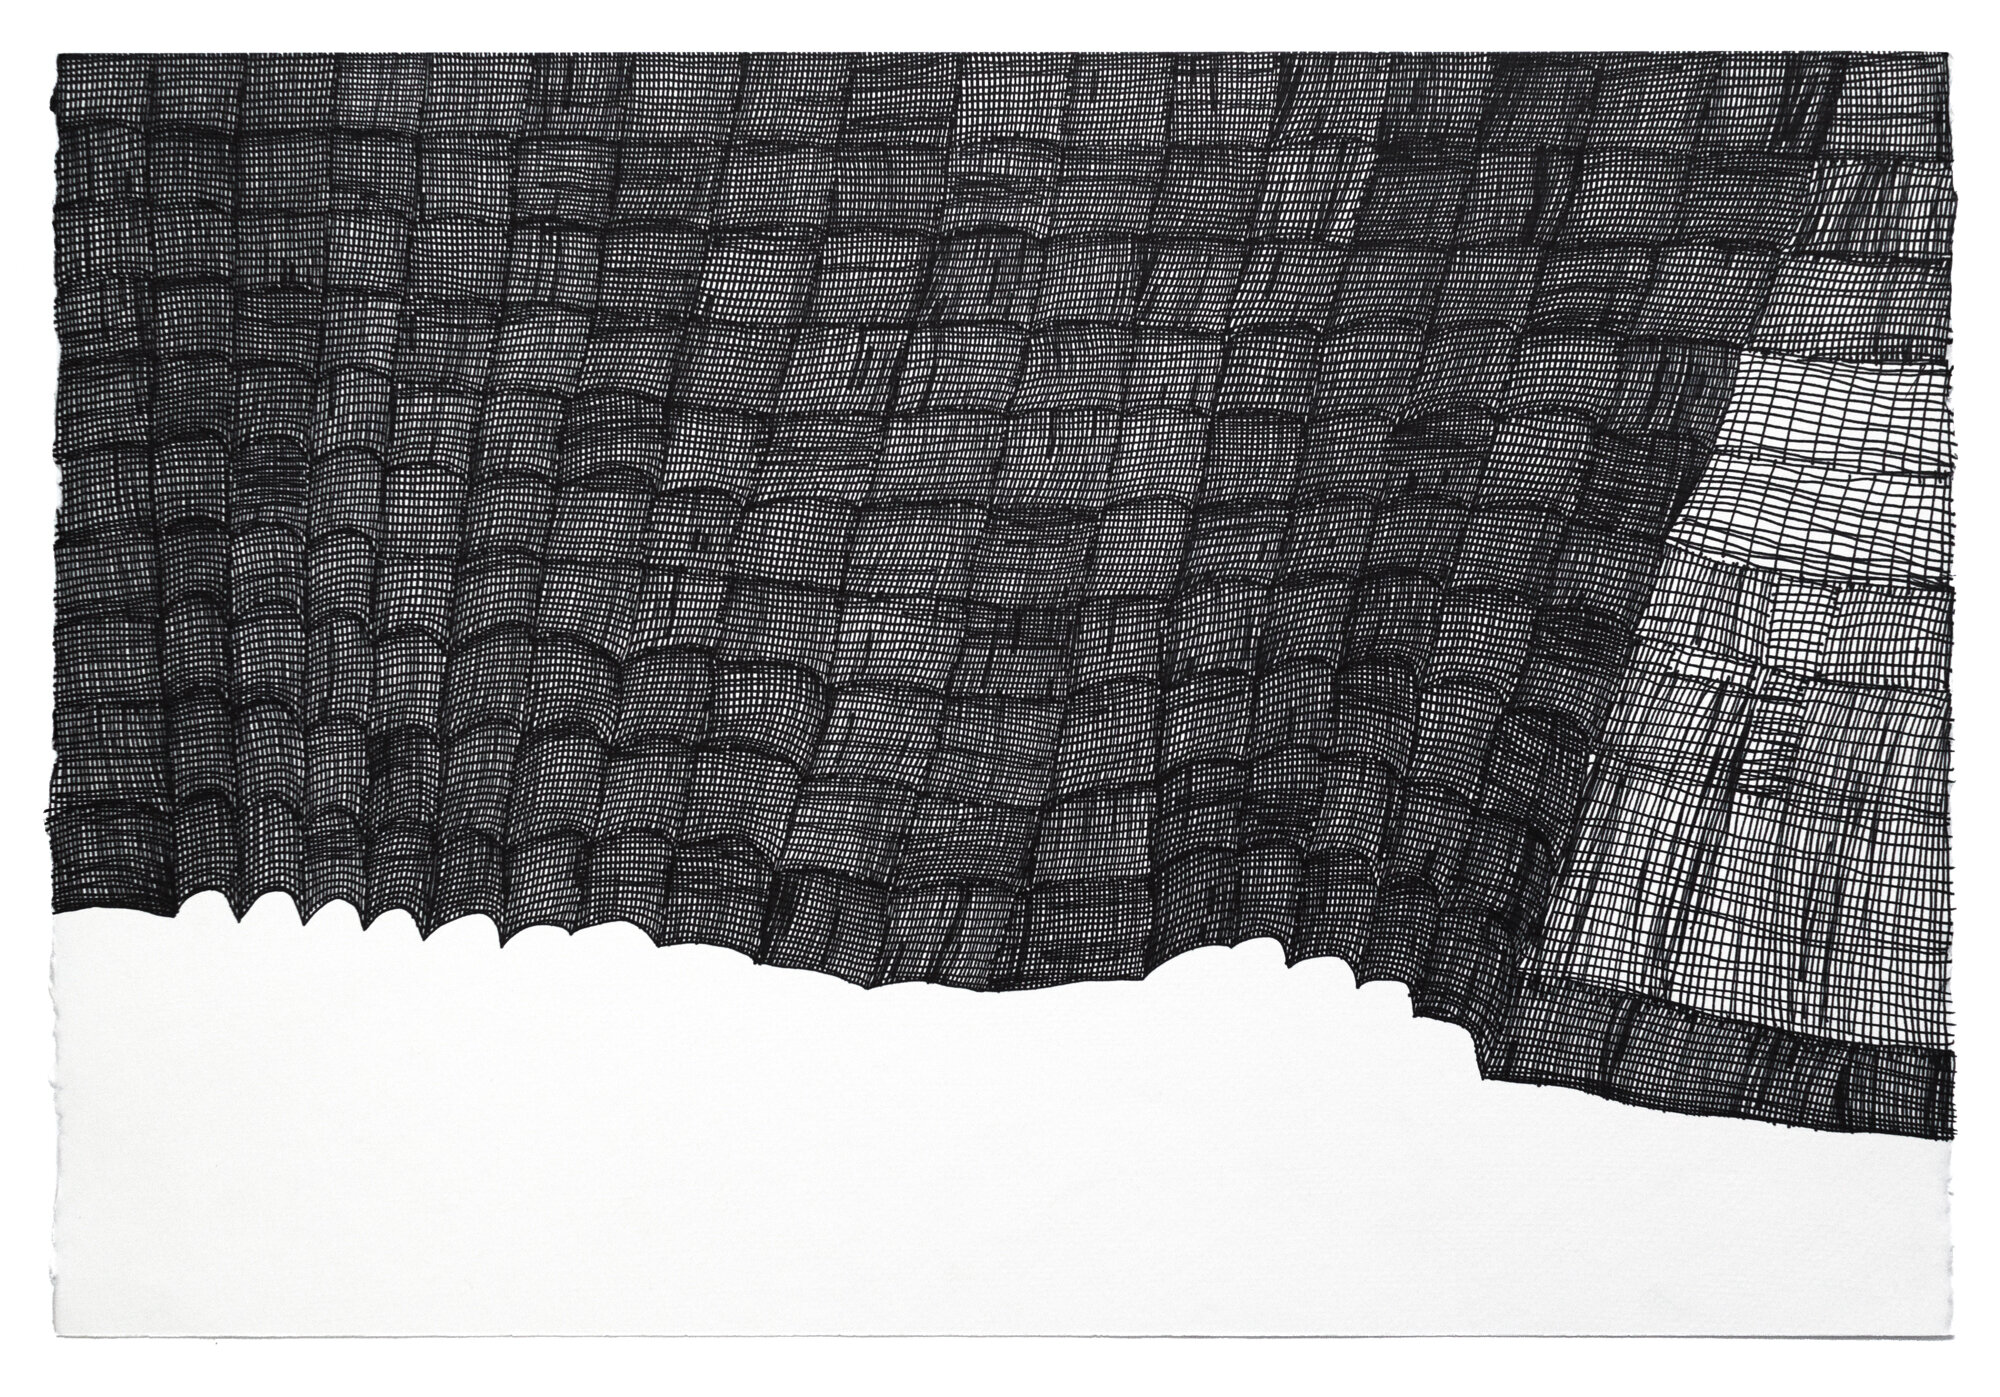 Susan Janow, Untitled (SJ 237), 2017, Ink on paper, 15 x 22.25 inches